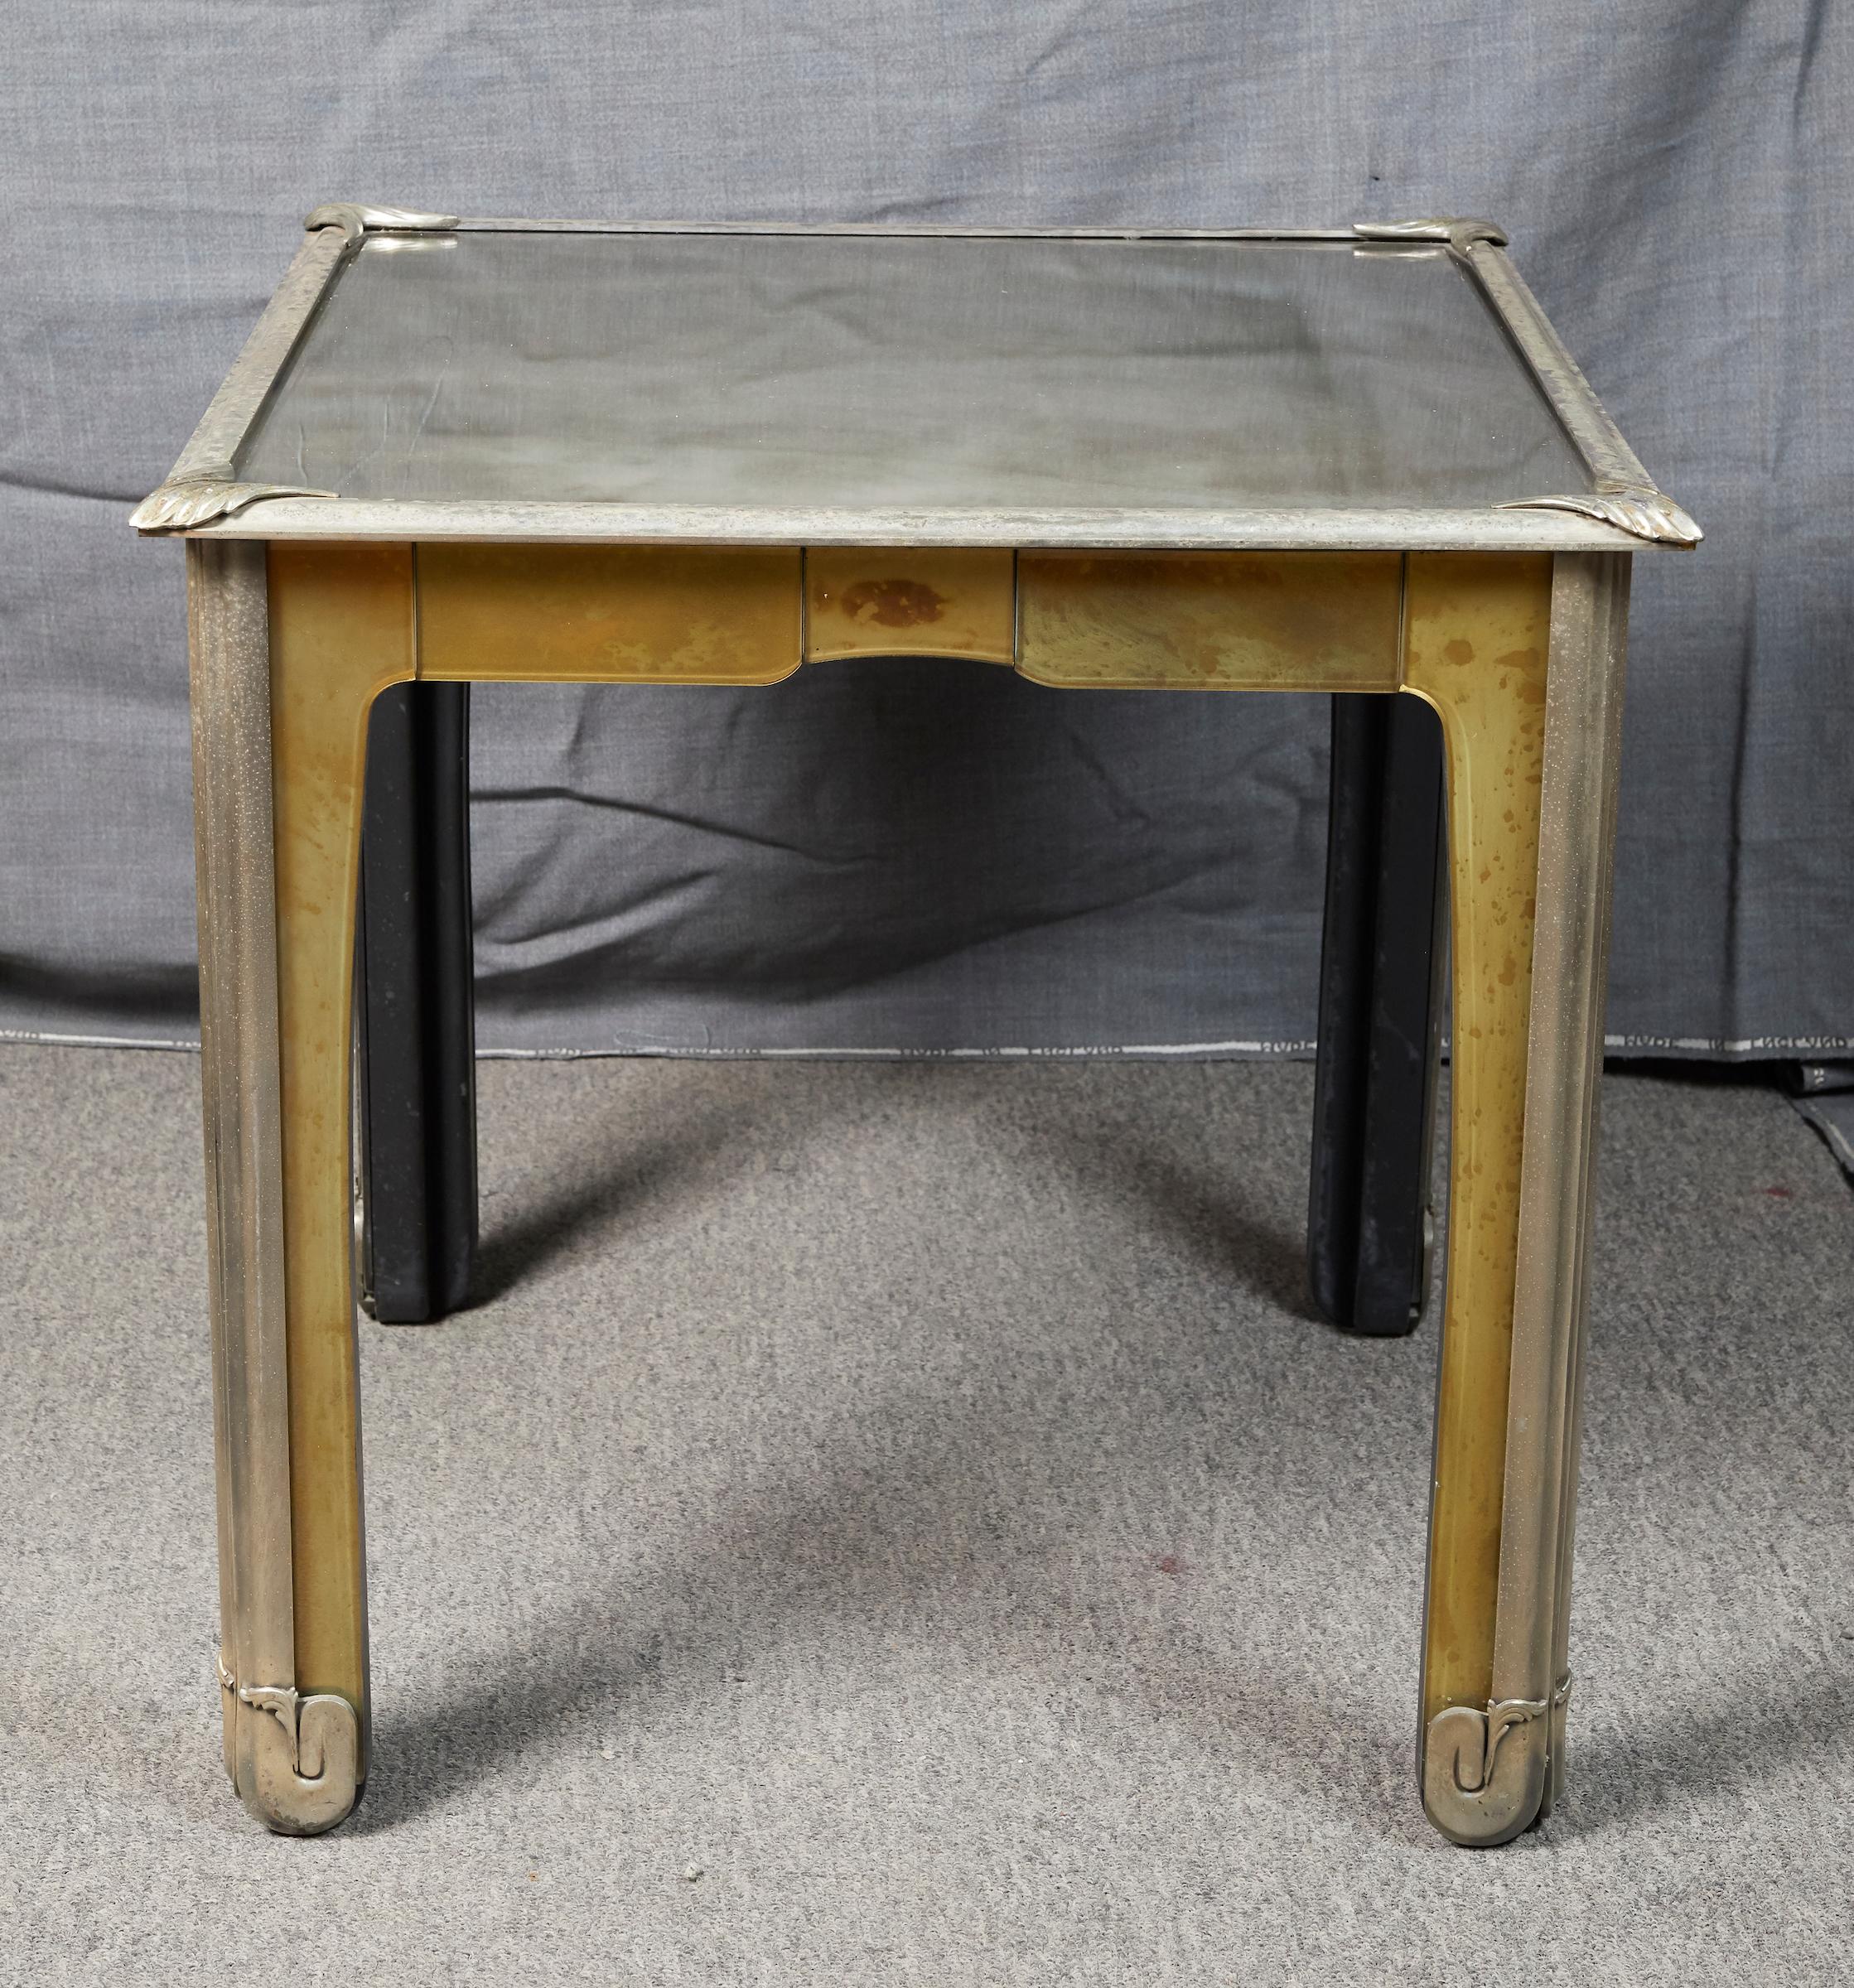 Elegant Italian Art Nouveau style silvered metal and patinated mirrored side table.